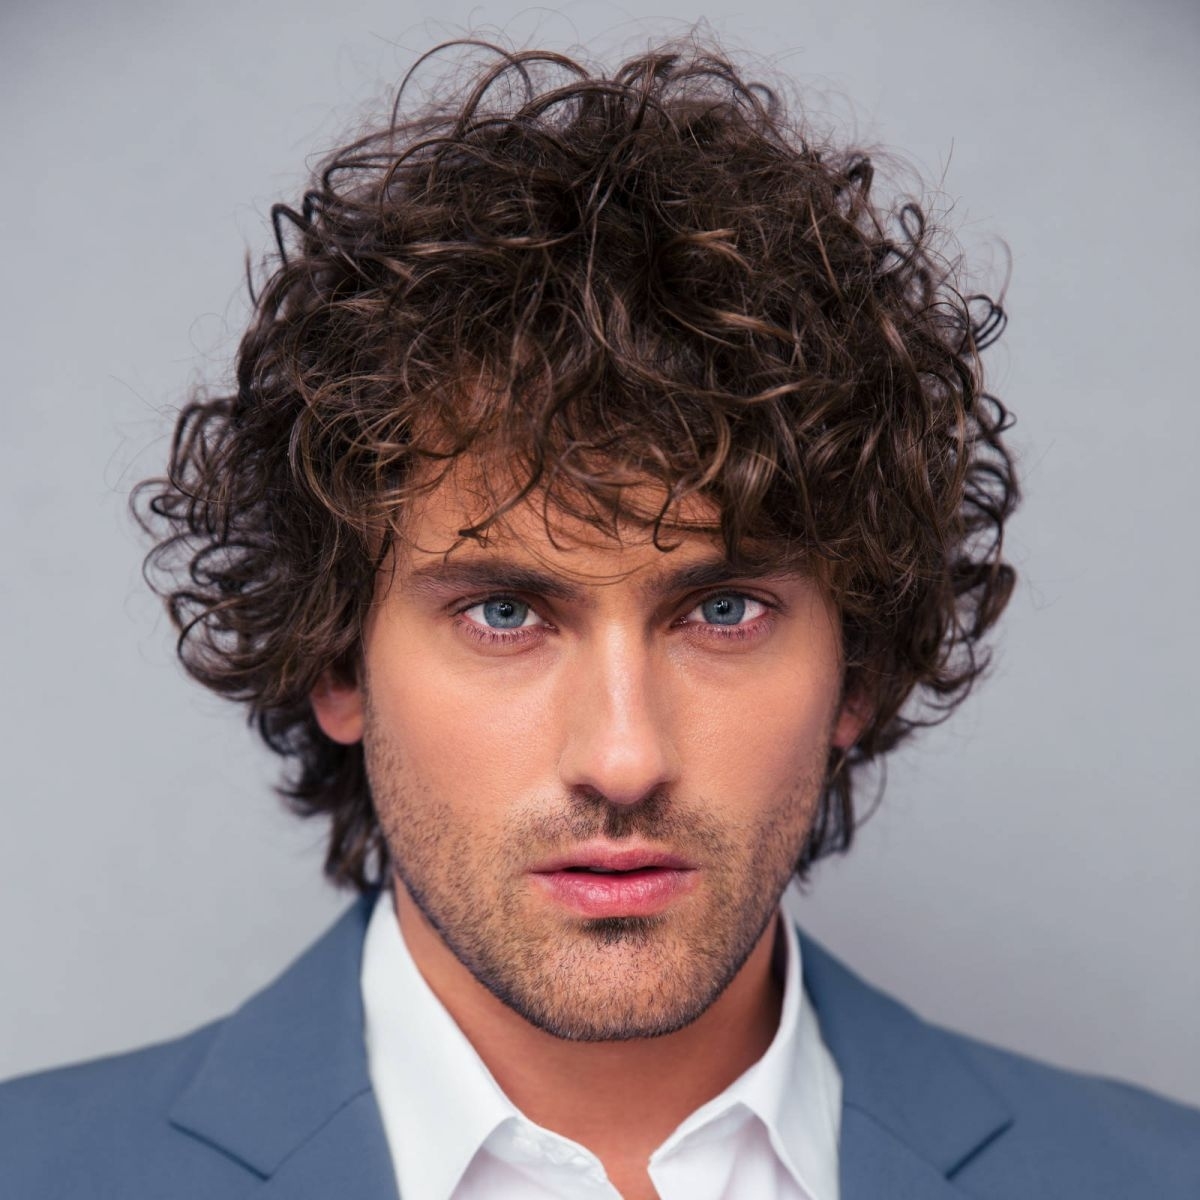 40 Modern Men's Hairstyles For Curly Hair (That Will Change Your Look) inside Haircuts For Curly Unruly Hair